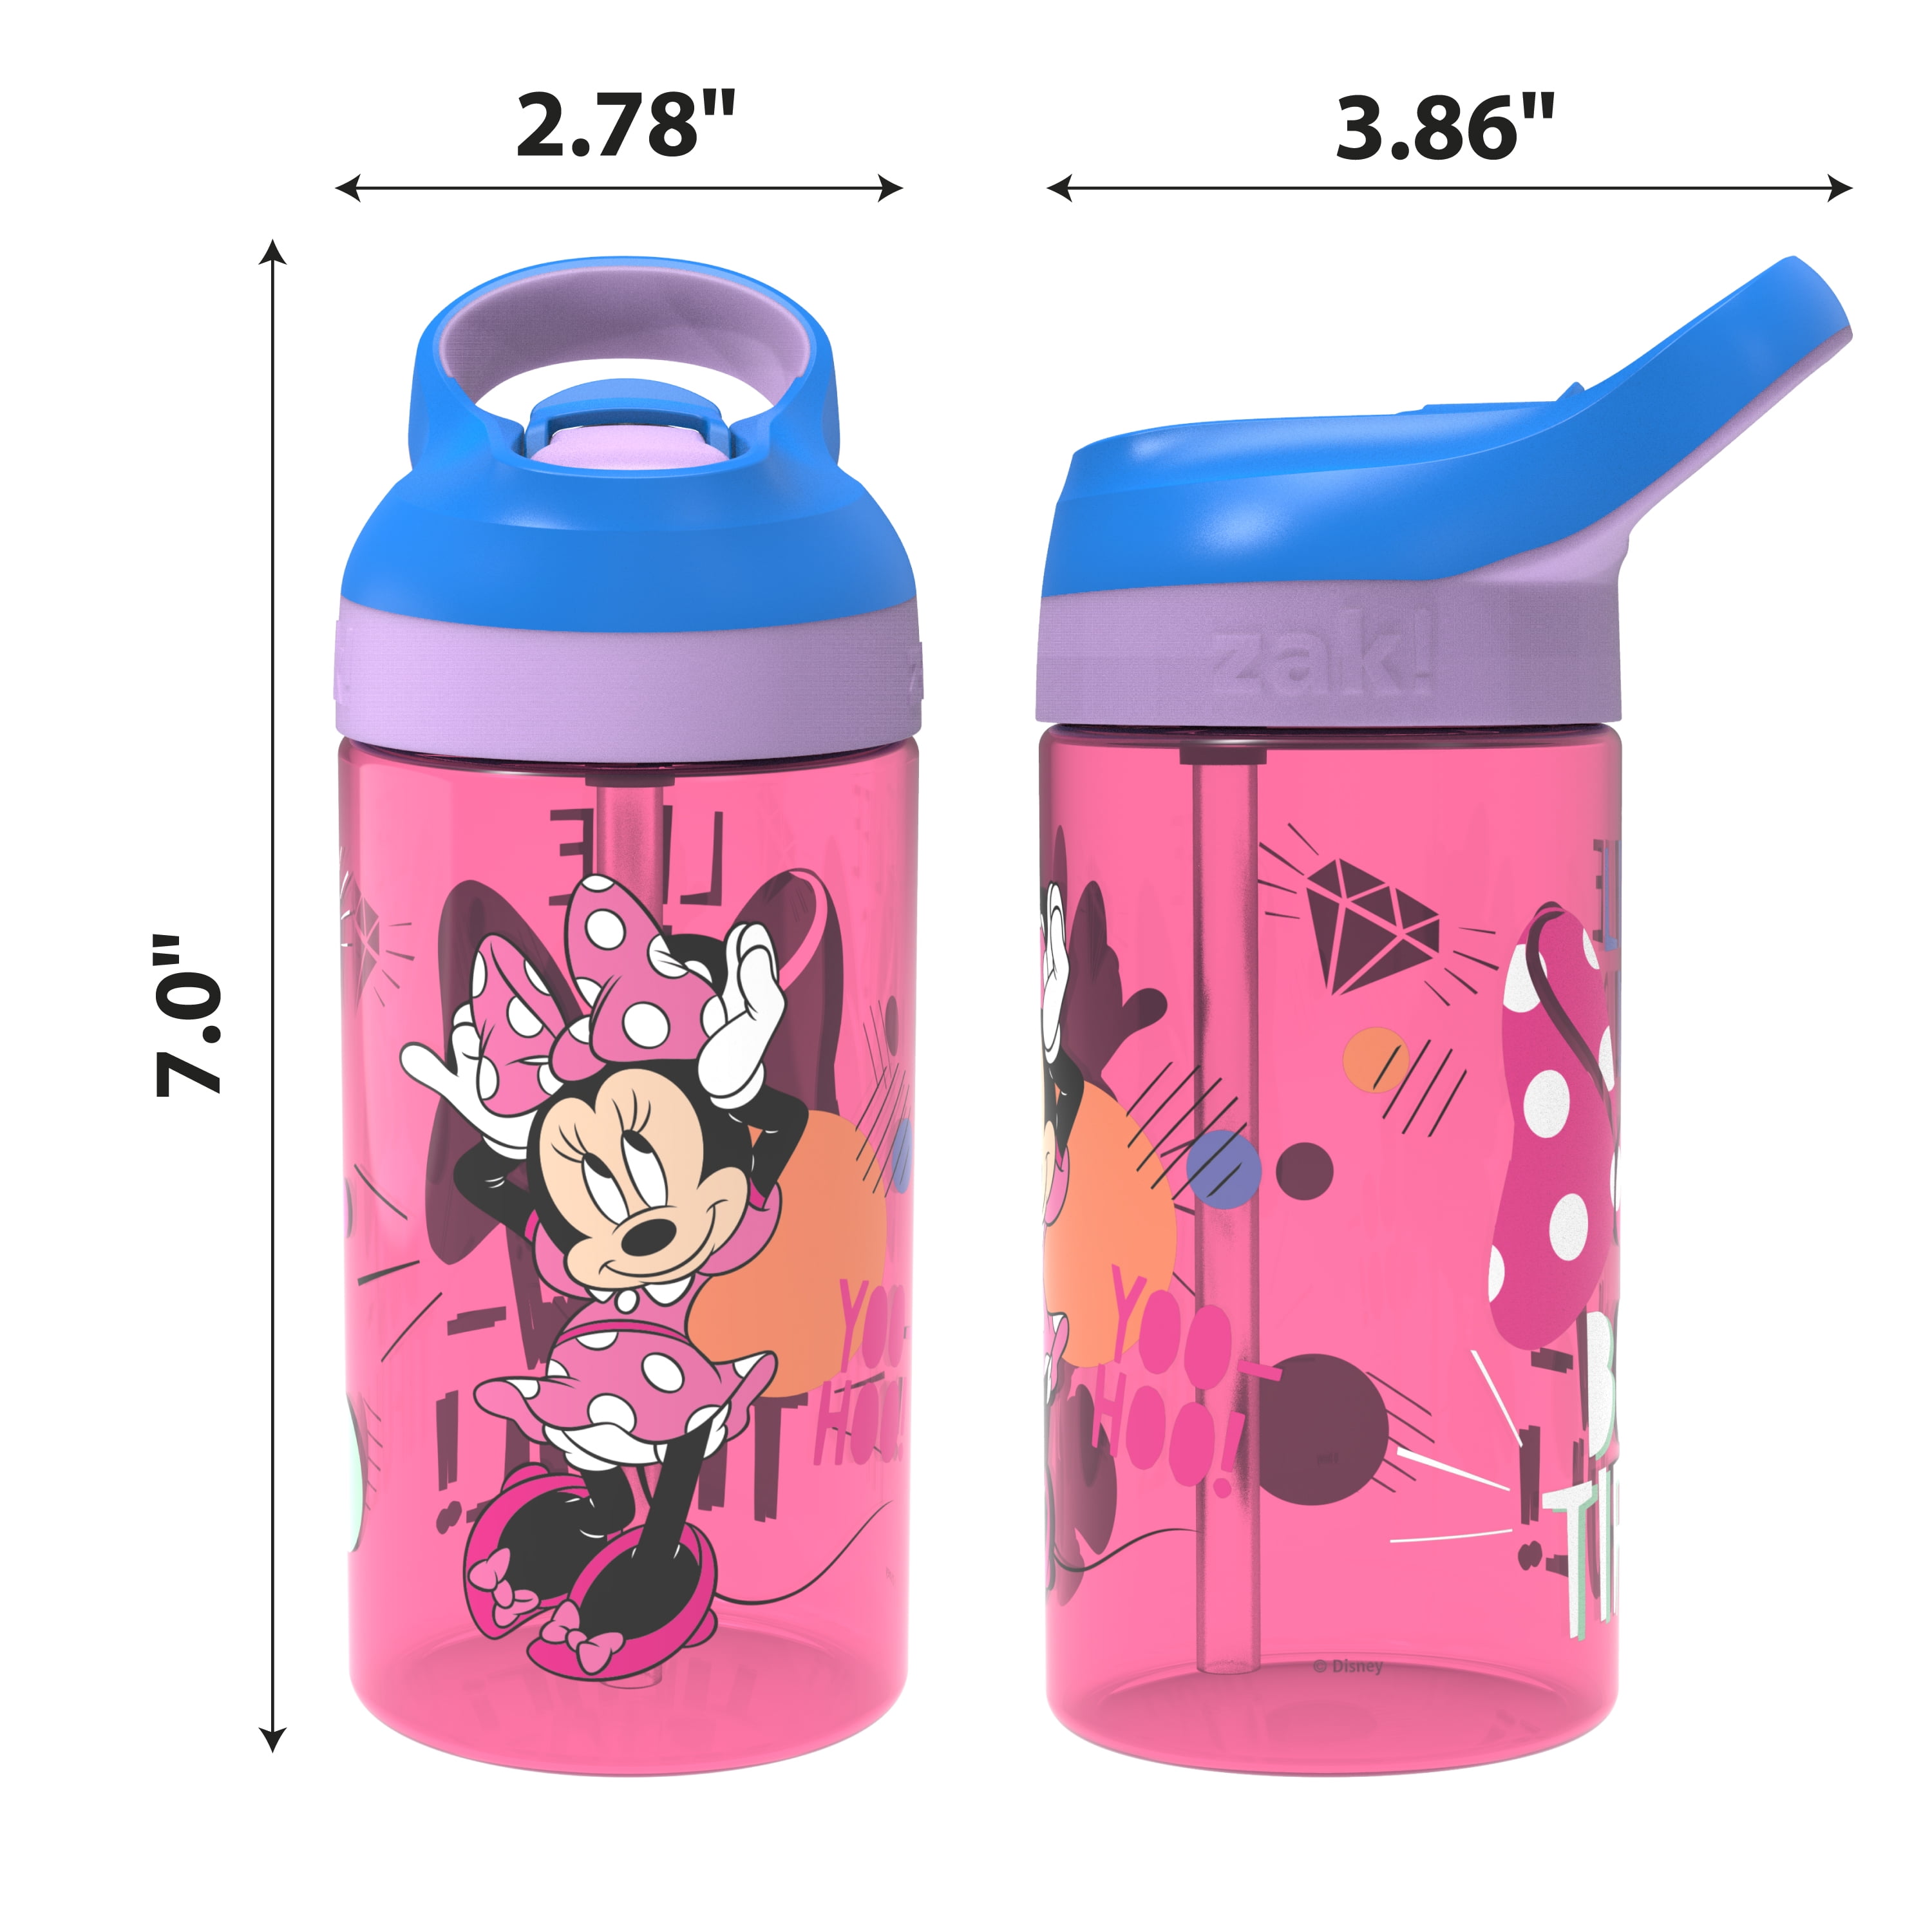 Classic Disney Minnie Mouse Lunch Box and Water Bottle Set for Girls, Pink,  Plastic